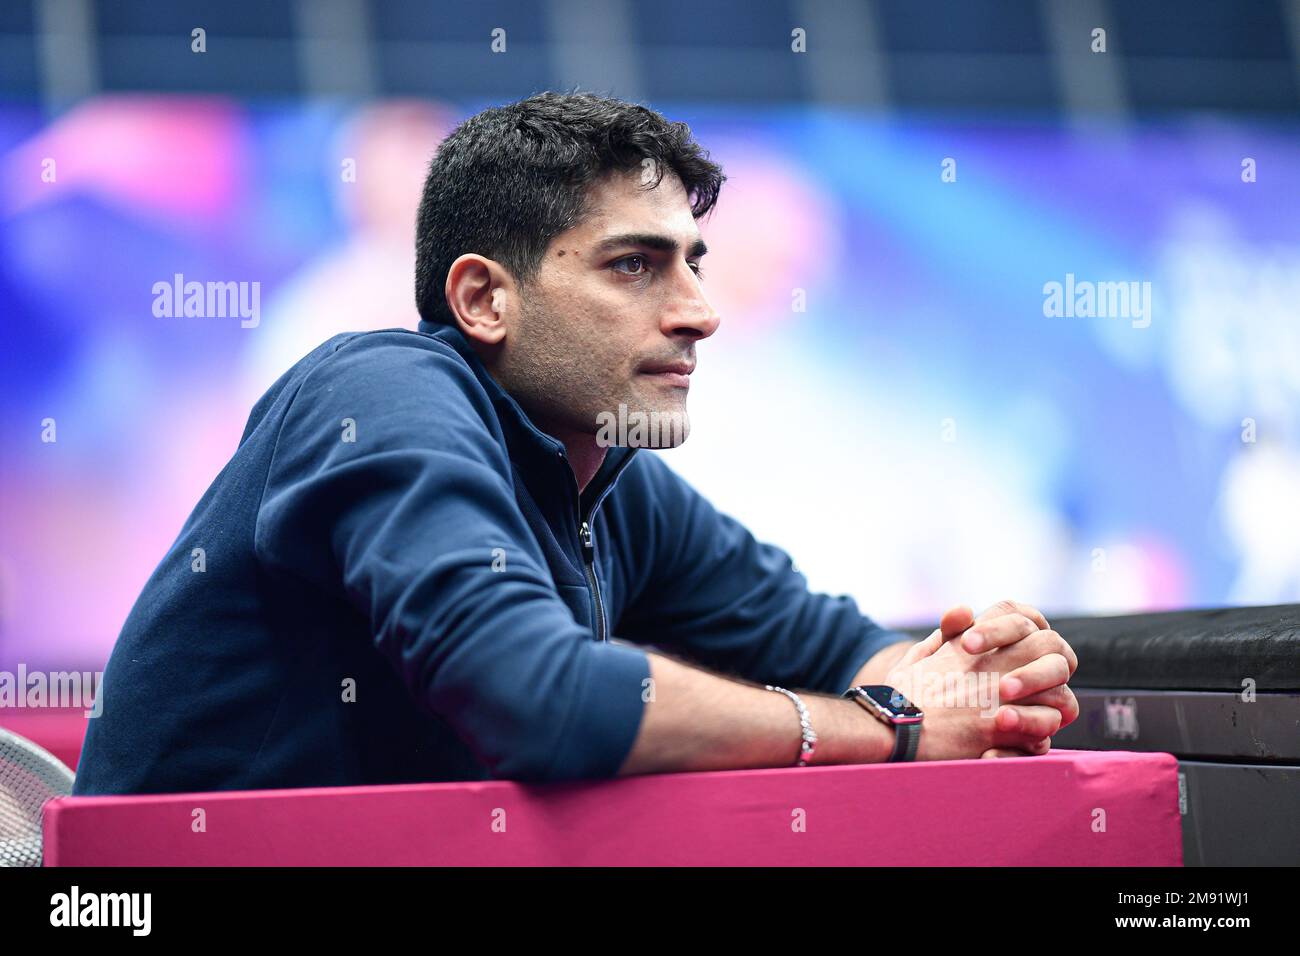 Amir Shabakehsaz coach during the Mazars Challenge International of Fencing (foil) at Stade Pierre de Coubertin on January 14, 2023 in Paris, France. Stock Photo